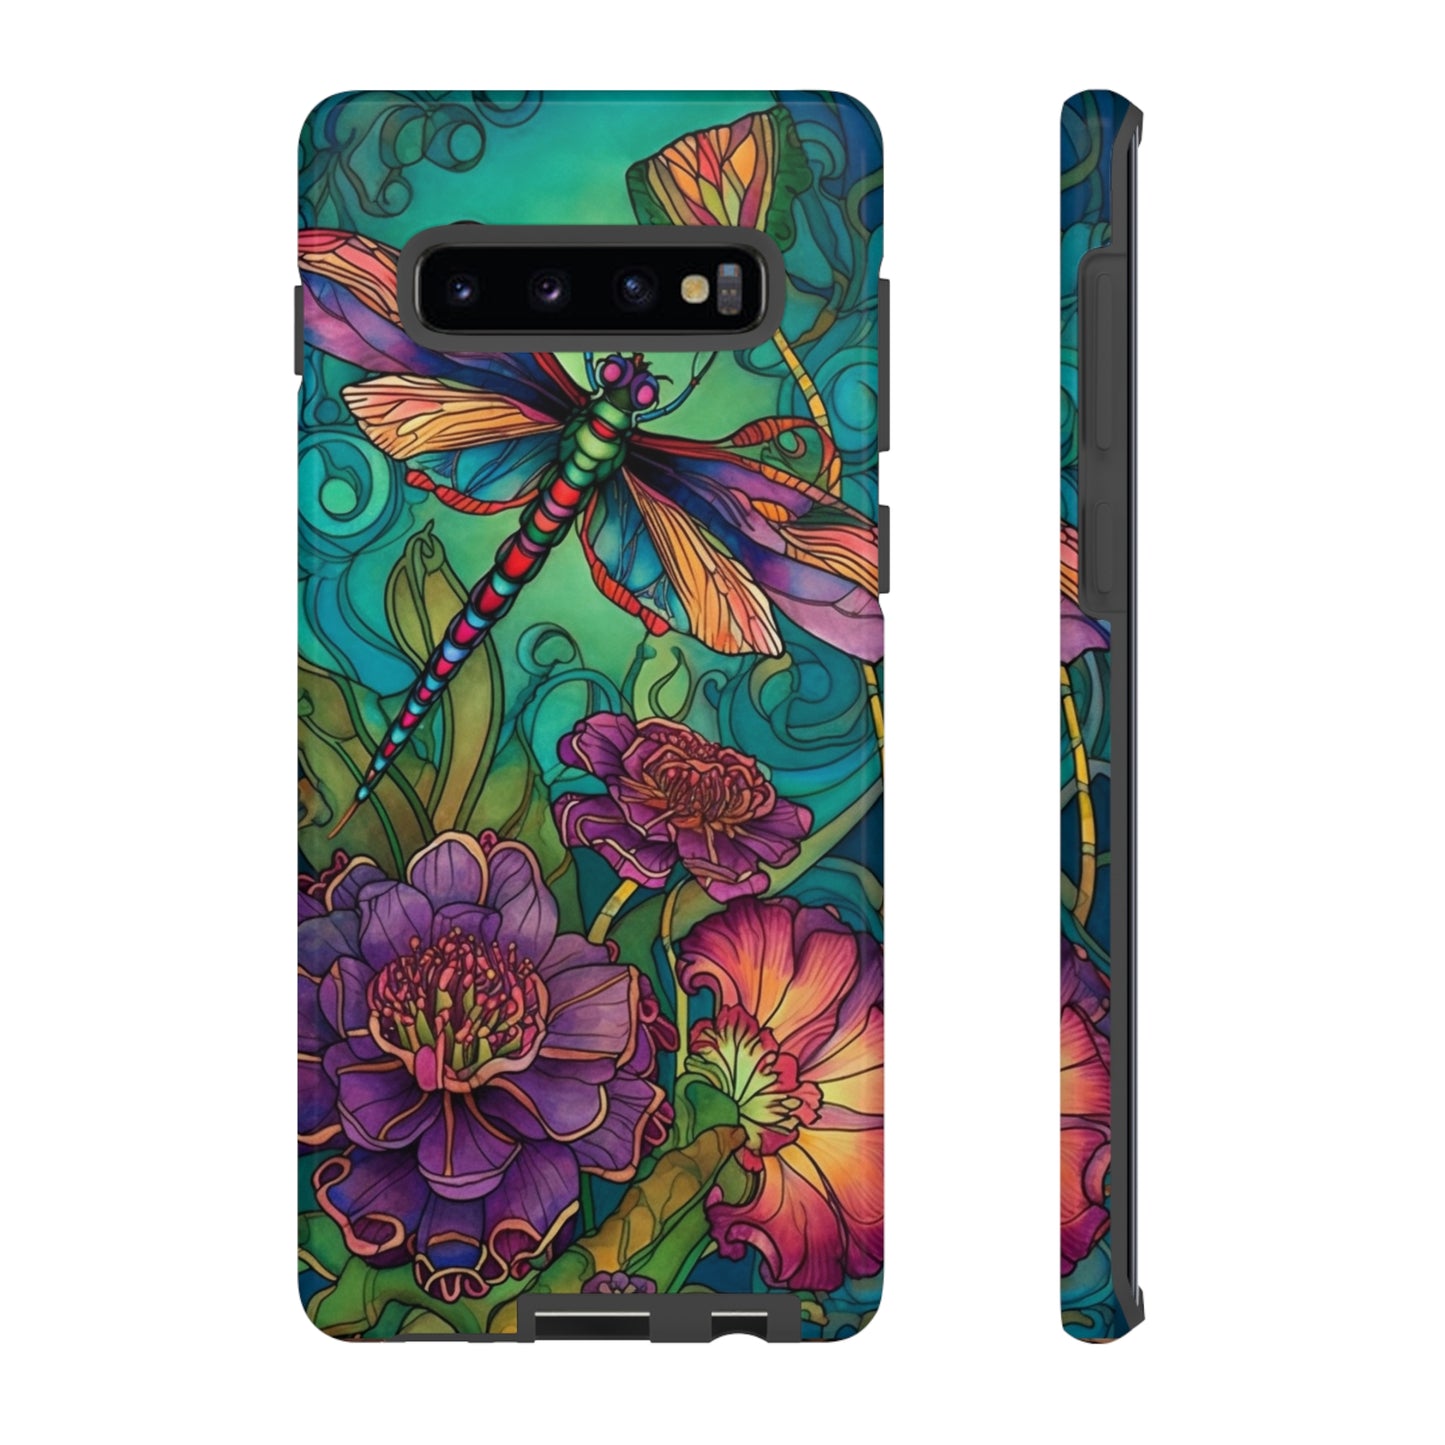 Art Nouveau Dragonfly - A Timeless Symbol of Elegance for Google Pixel, iPhone, and Samsung Cases